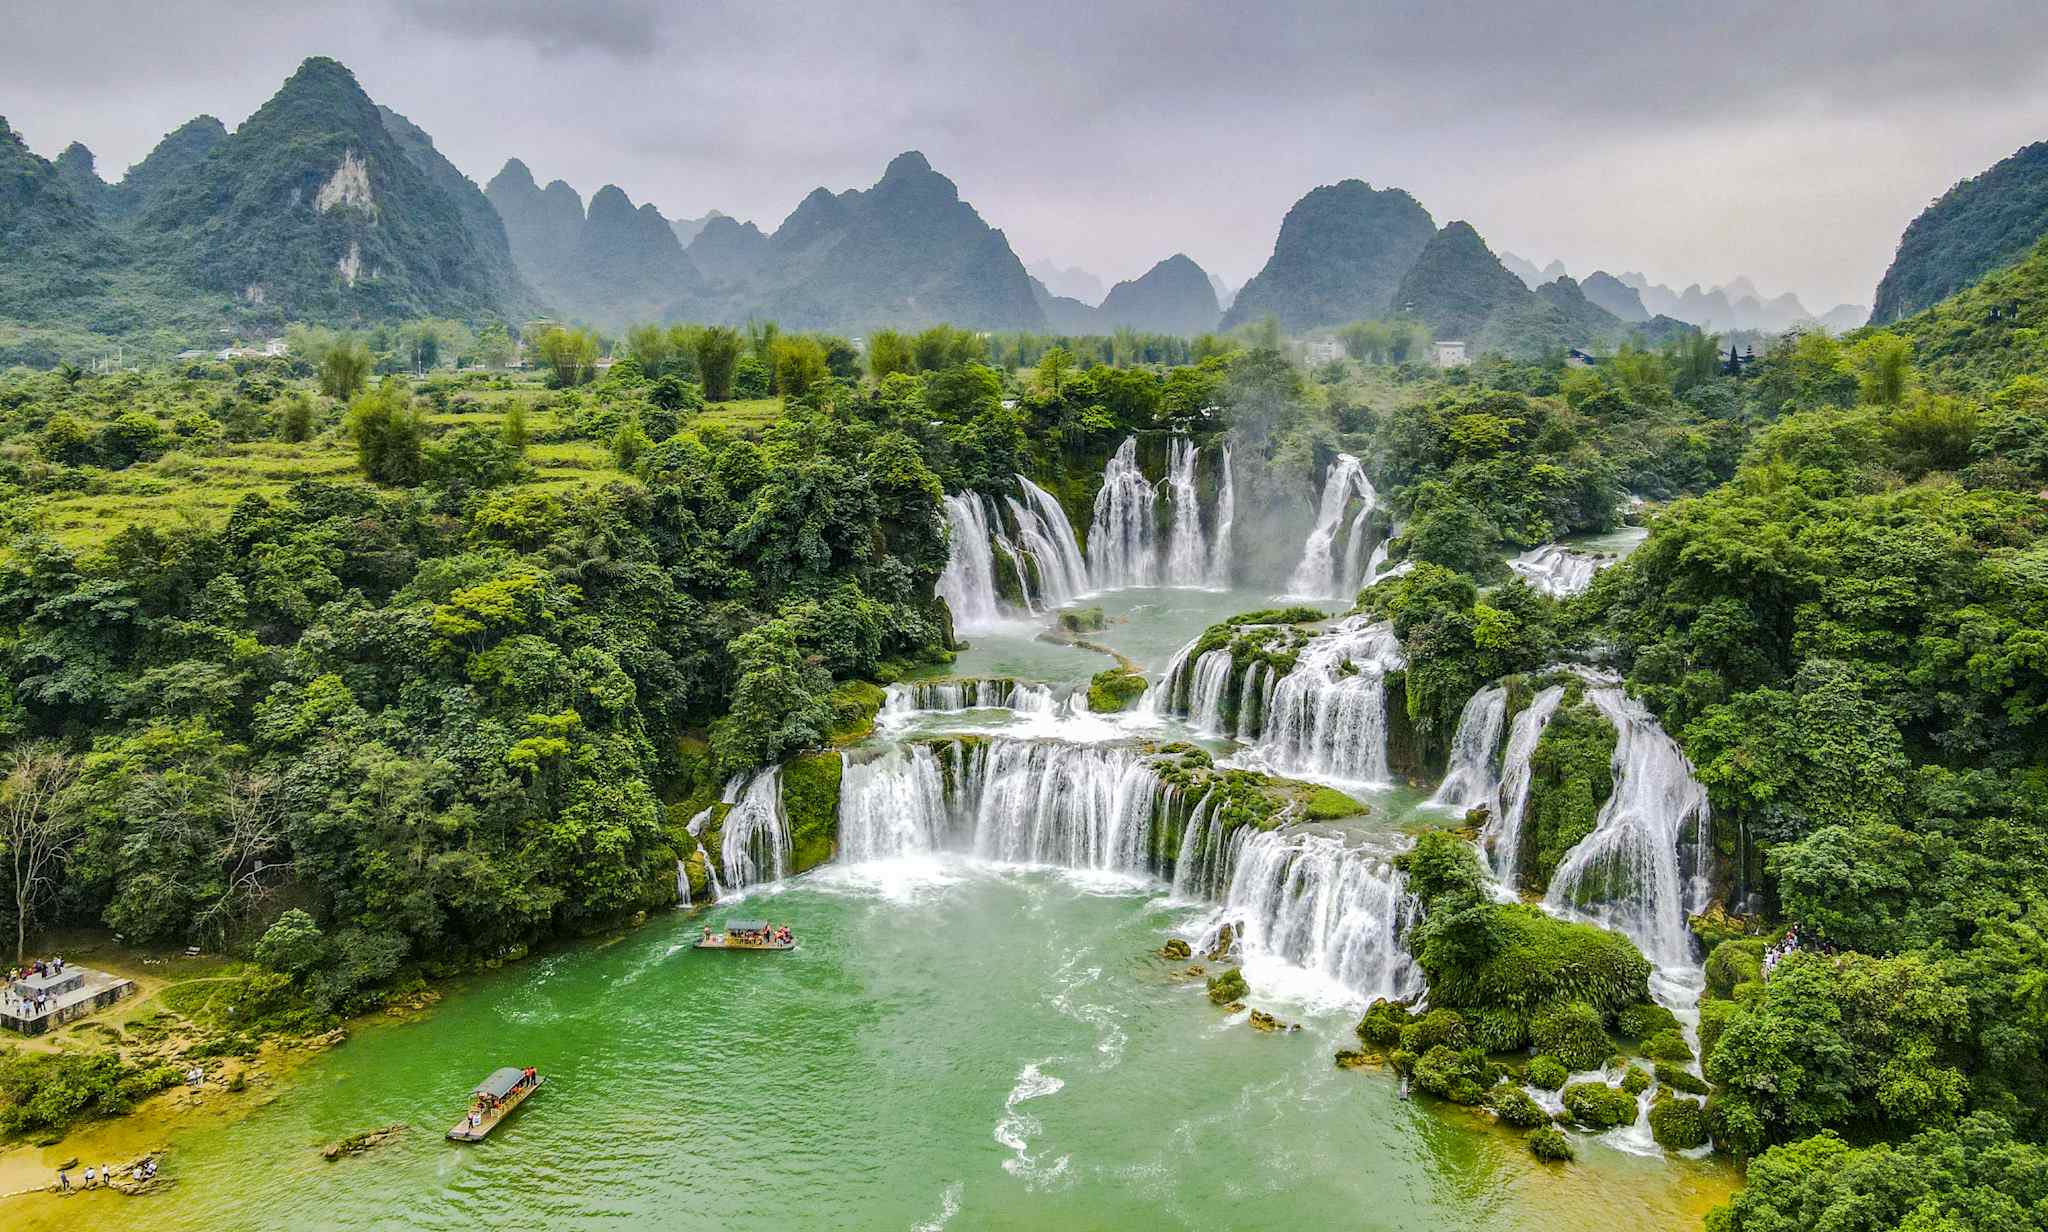 View of Ban Gioc Falls in Vietnam. Photo: GettyImages-1438384588

